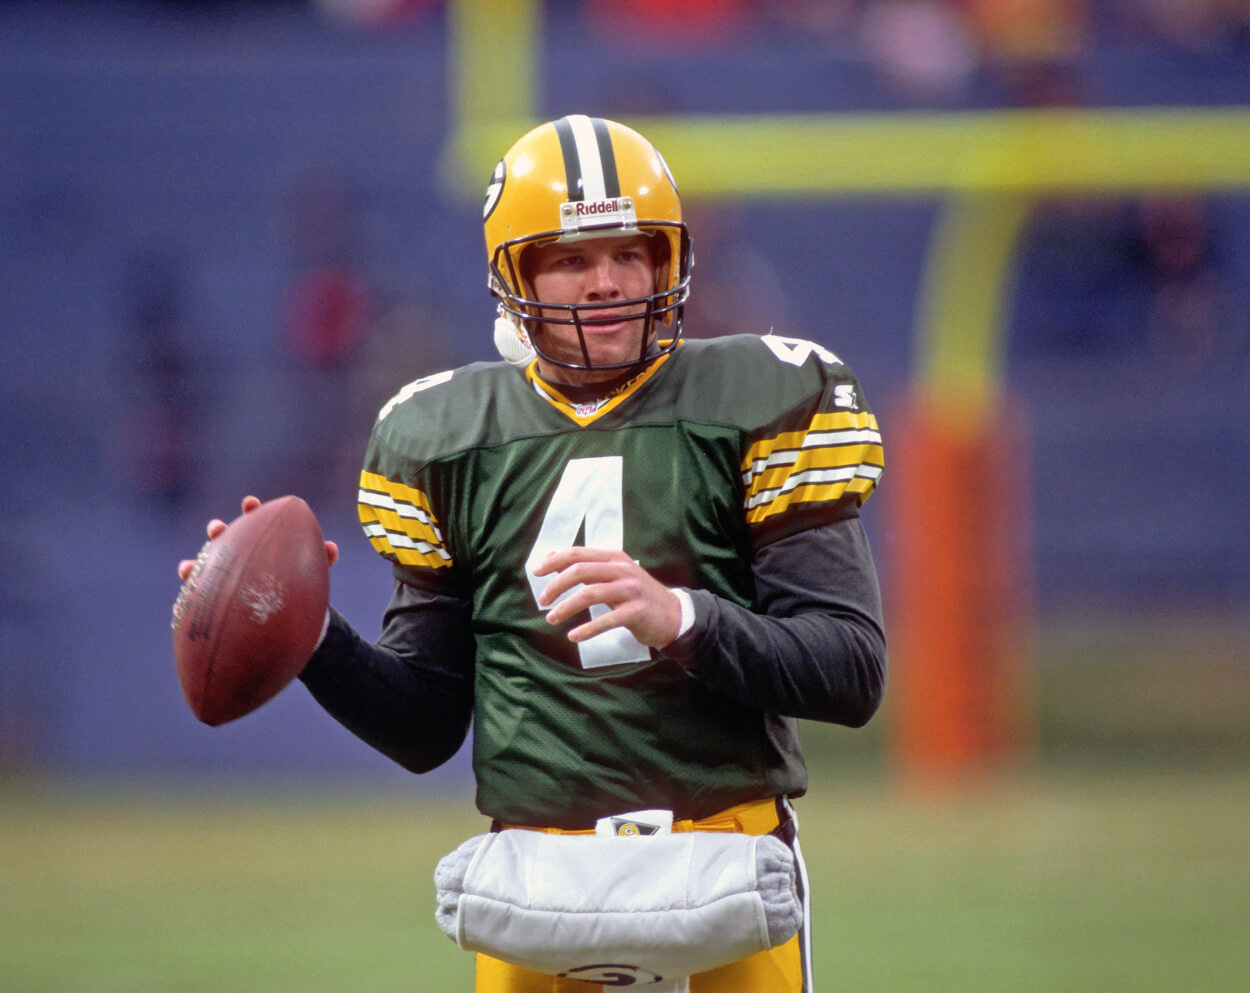 Quarterback Brett Favre of the Green Bay Packers looks on from the field.